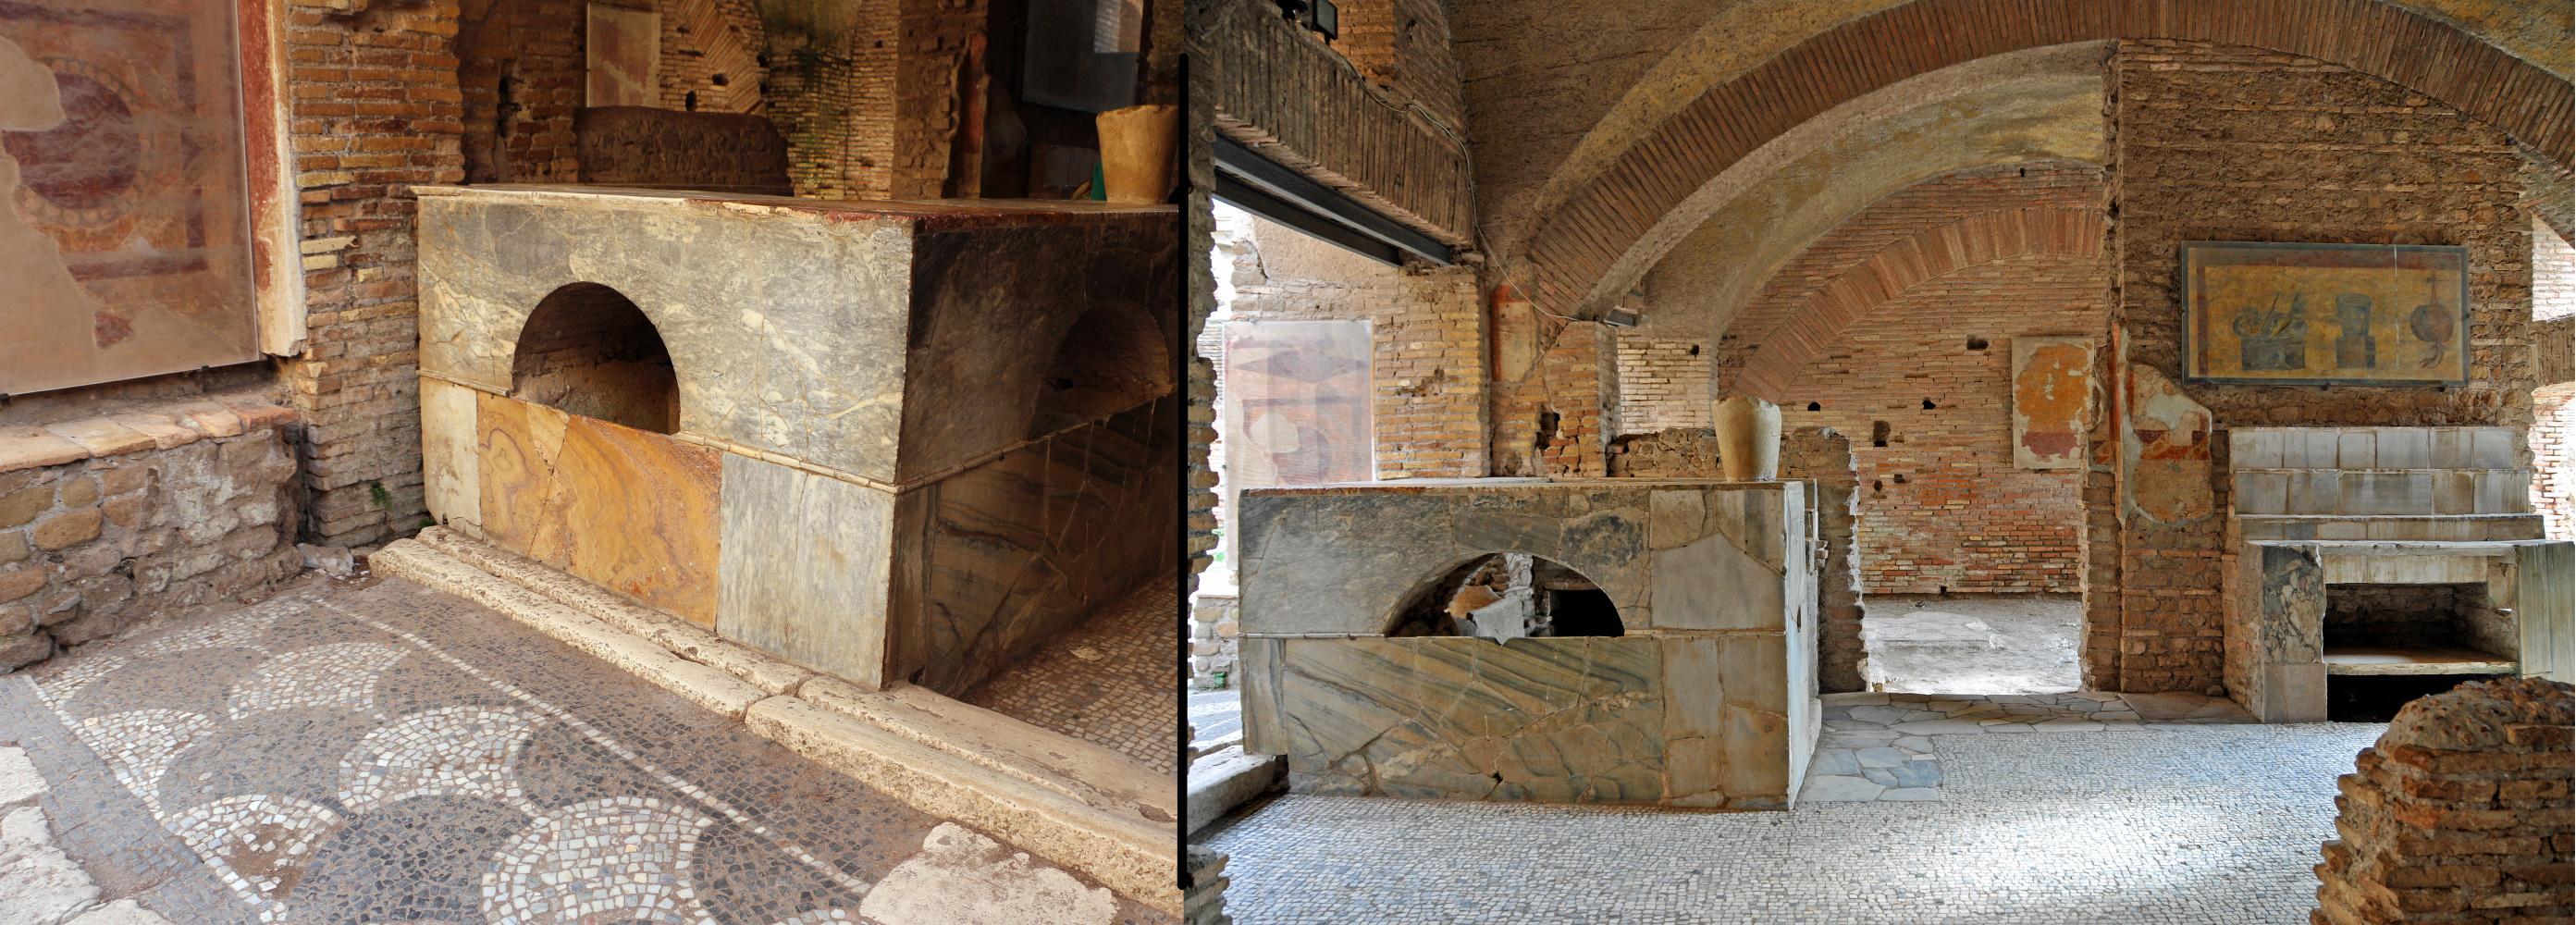 The Roman bar [thermopolium] in Ostia Antica, Italy [R I,II,5-7]. 3rd-4th c. CE. The L-shaped bar counter from outside & inside the room.jpg